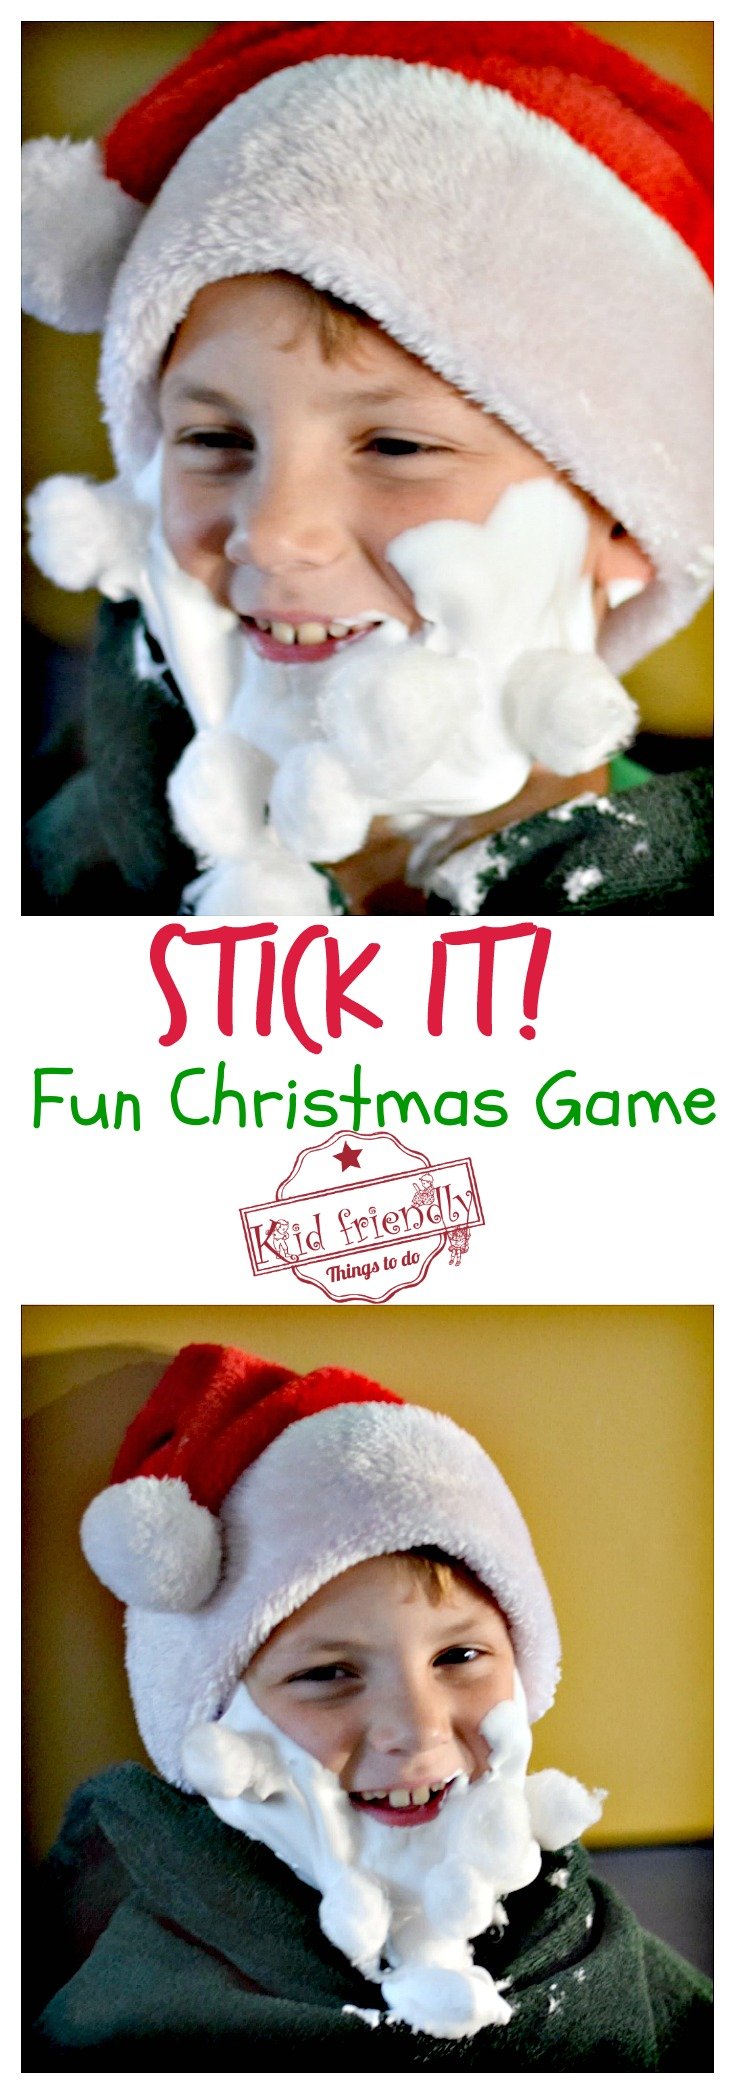 Stick It! A Fun, Cheap and Easy Christmas Game to Play with family, kids, teens and adults - Who can stick the most cotton balls or marshmallows to Santa's beard? Great Minute To Win It game for the whole group! www.kidfriendlythingstodo.com